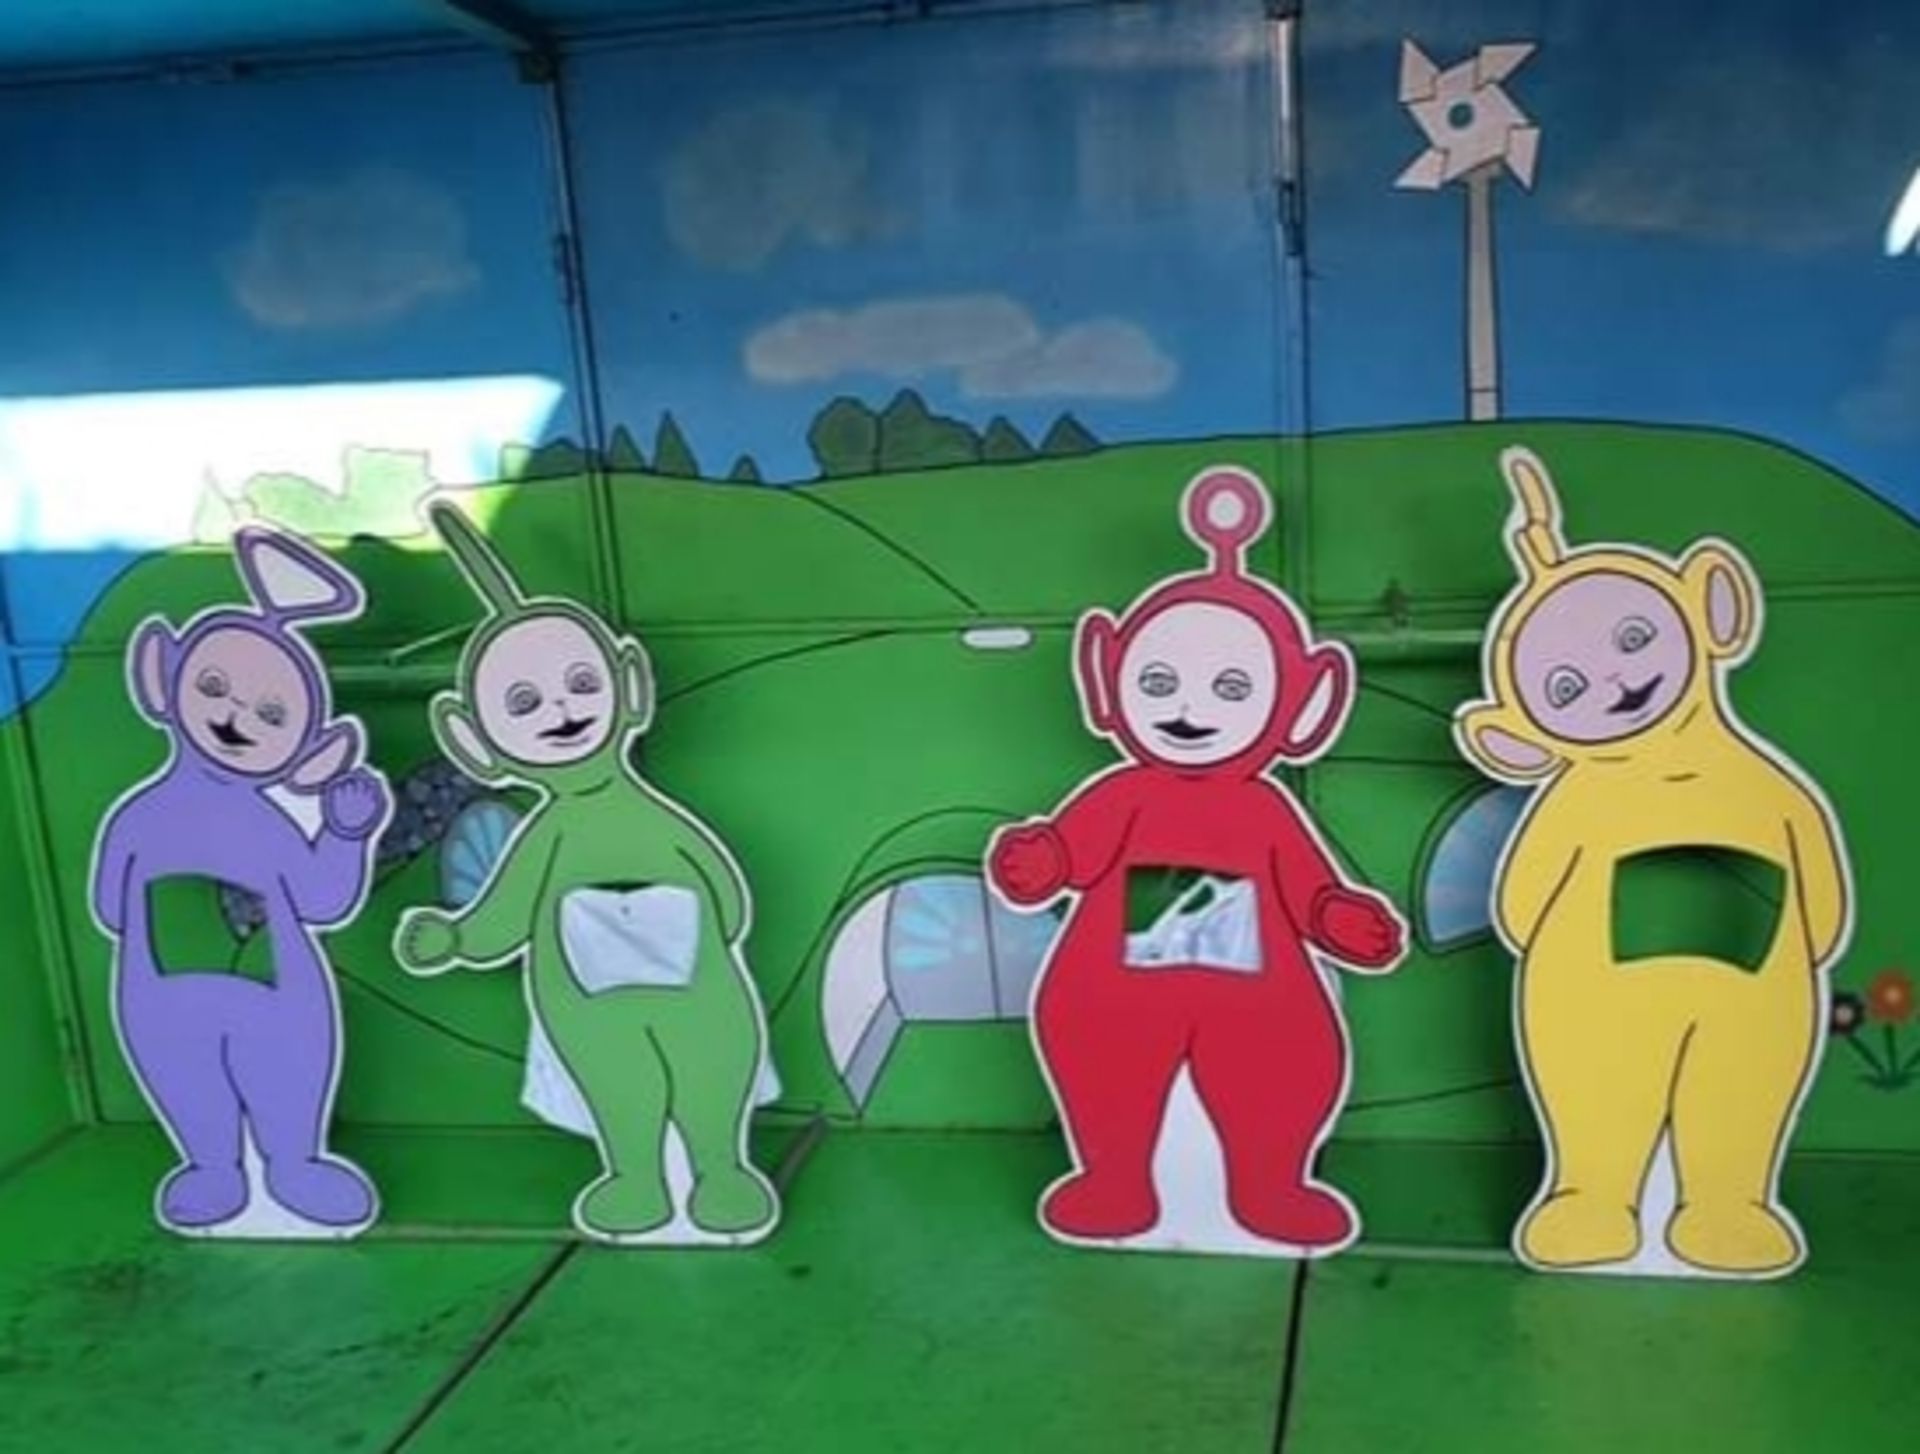 Fairground Teletubbies Side Stall - Image 3 of 4